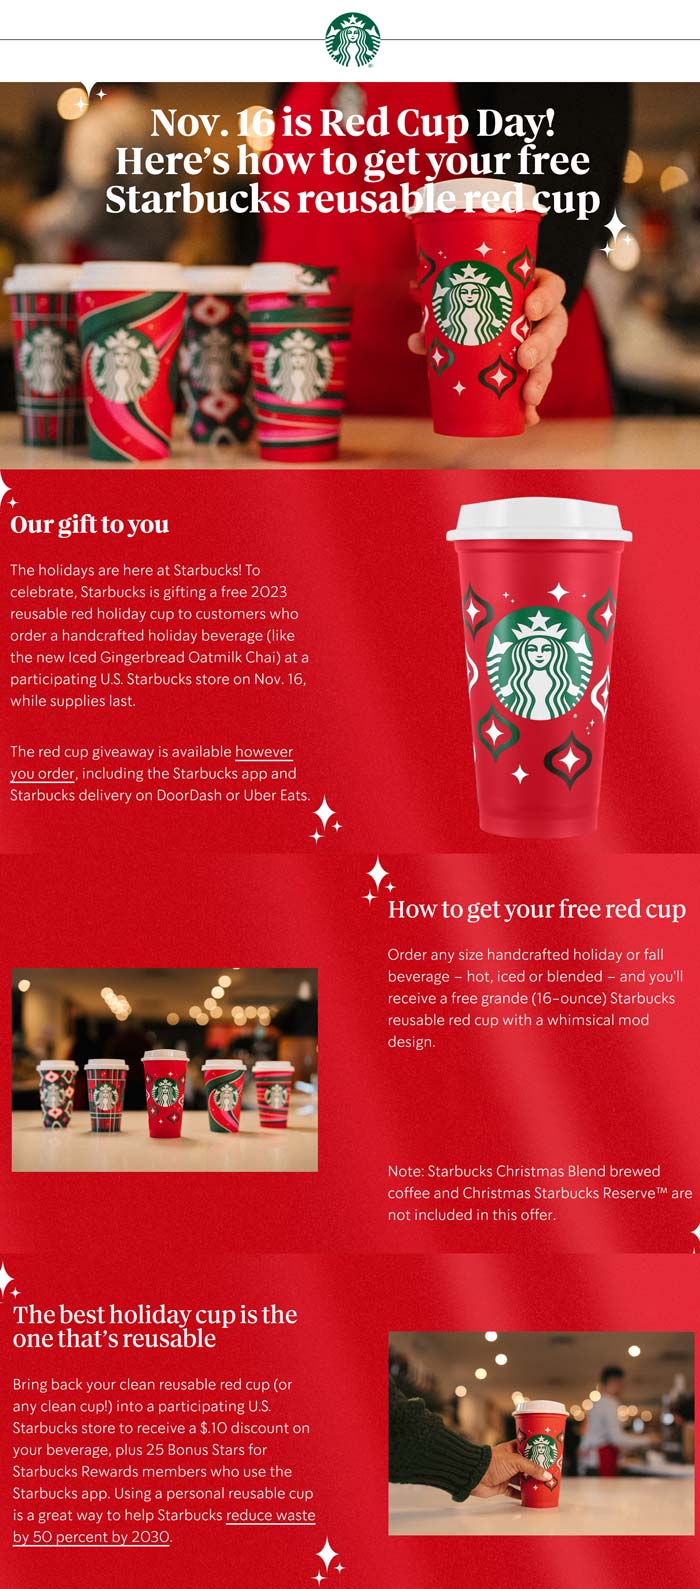 Starbucks restaurants Coupon  Free reusable red cup day today at Starbucks coffee #starbucks 